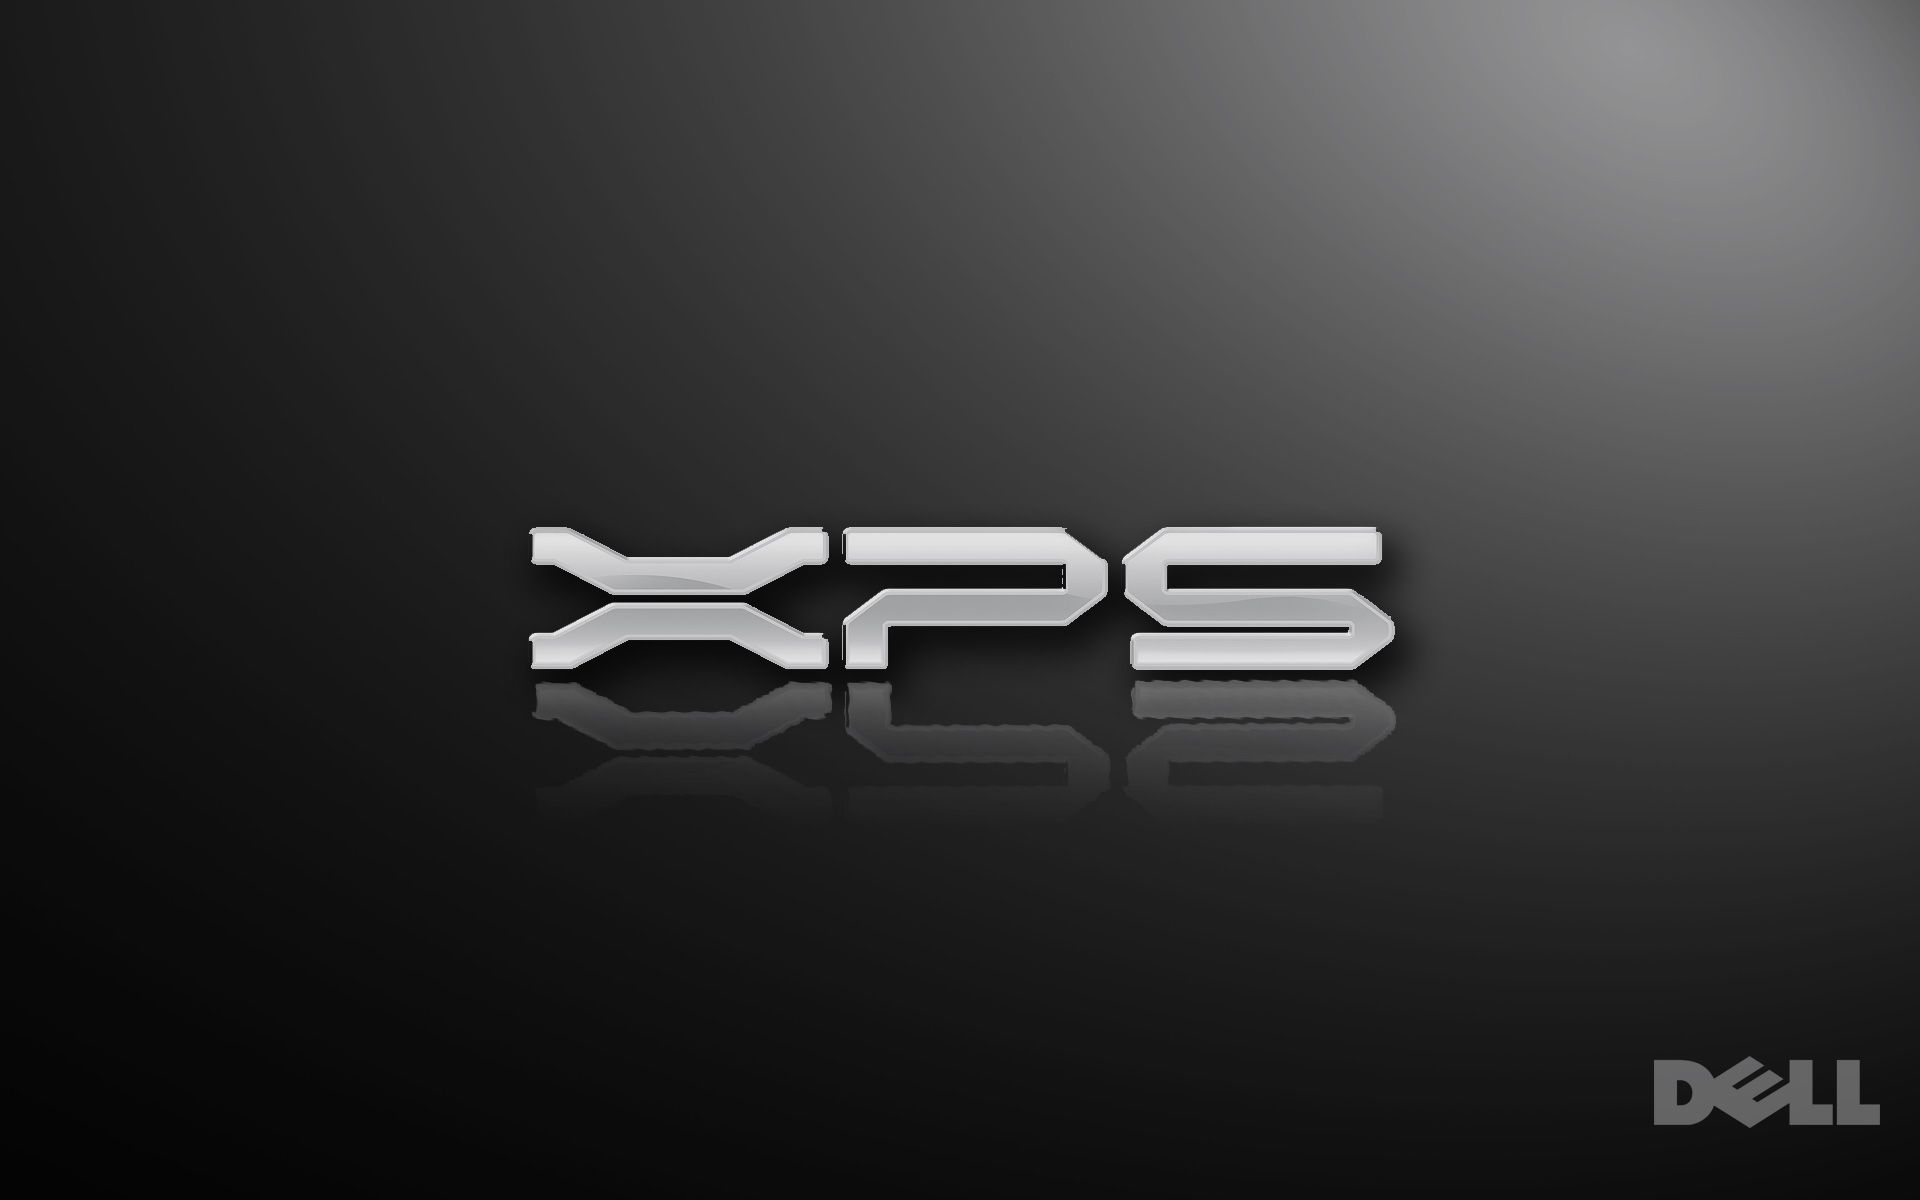 Dell Xps Logo Wallpapers